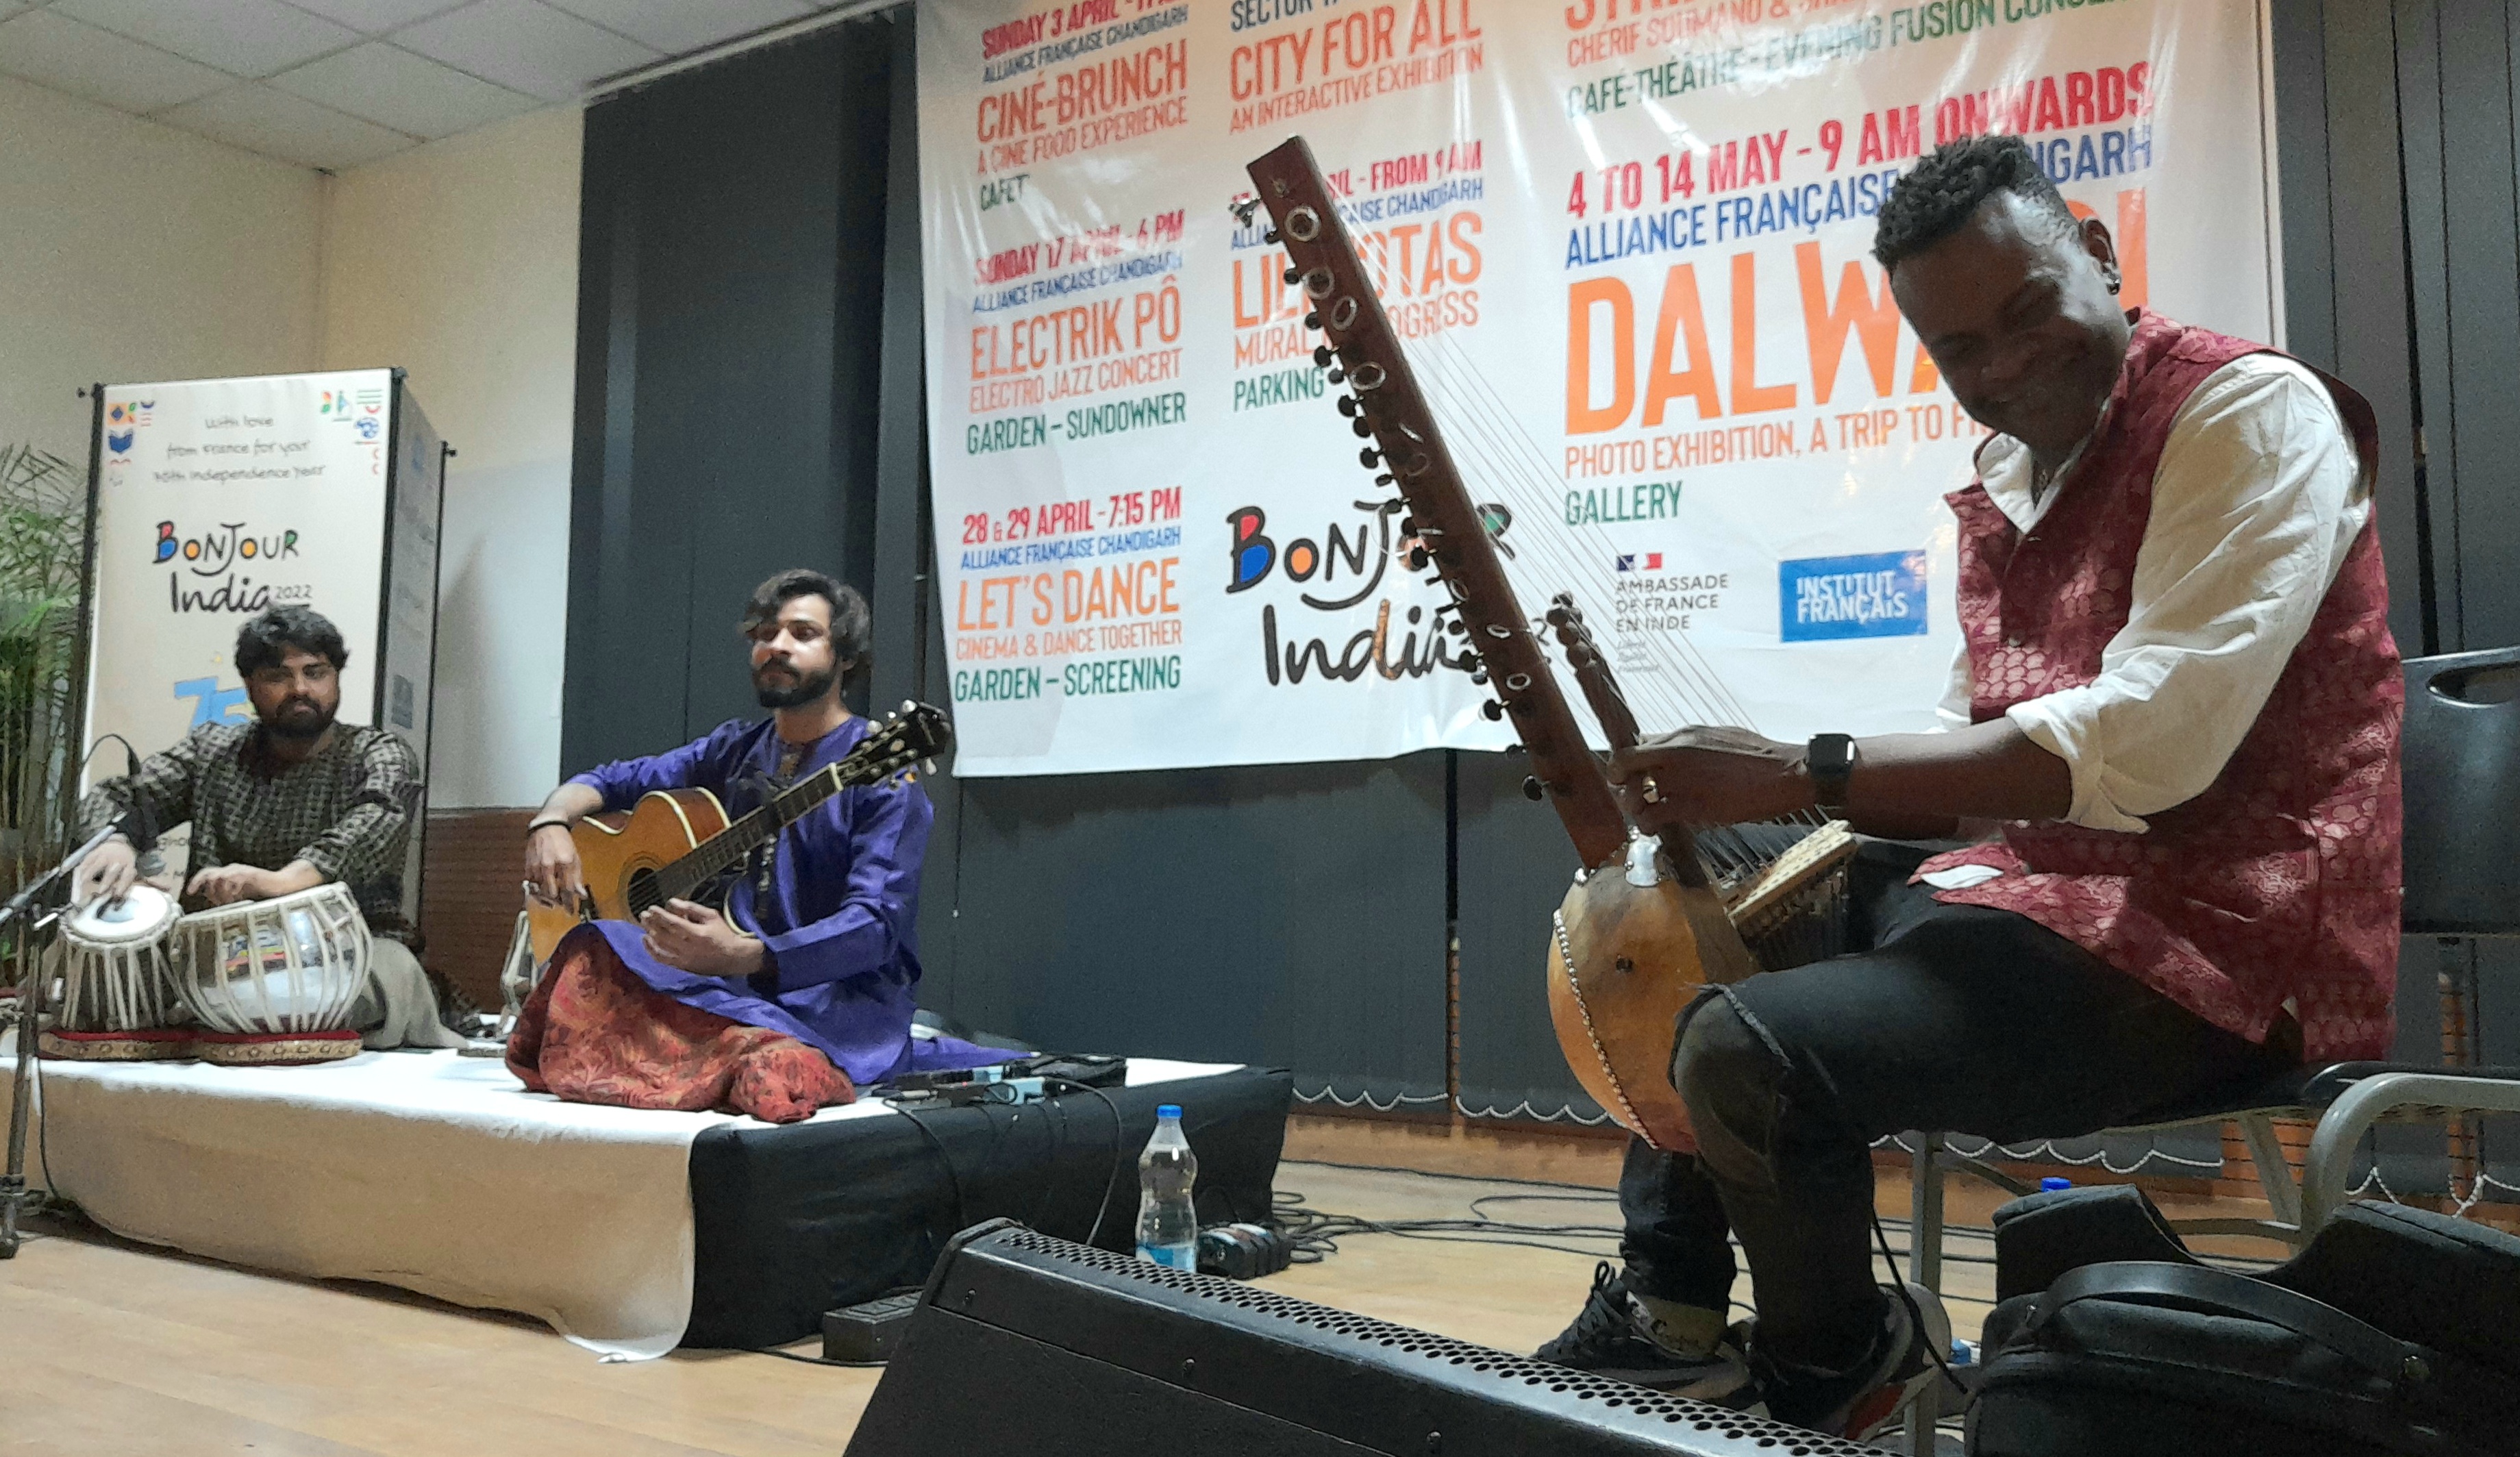 Chandigarh: A musical jugalbandi has audience asking for more